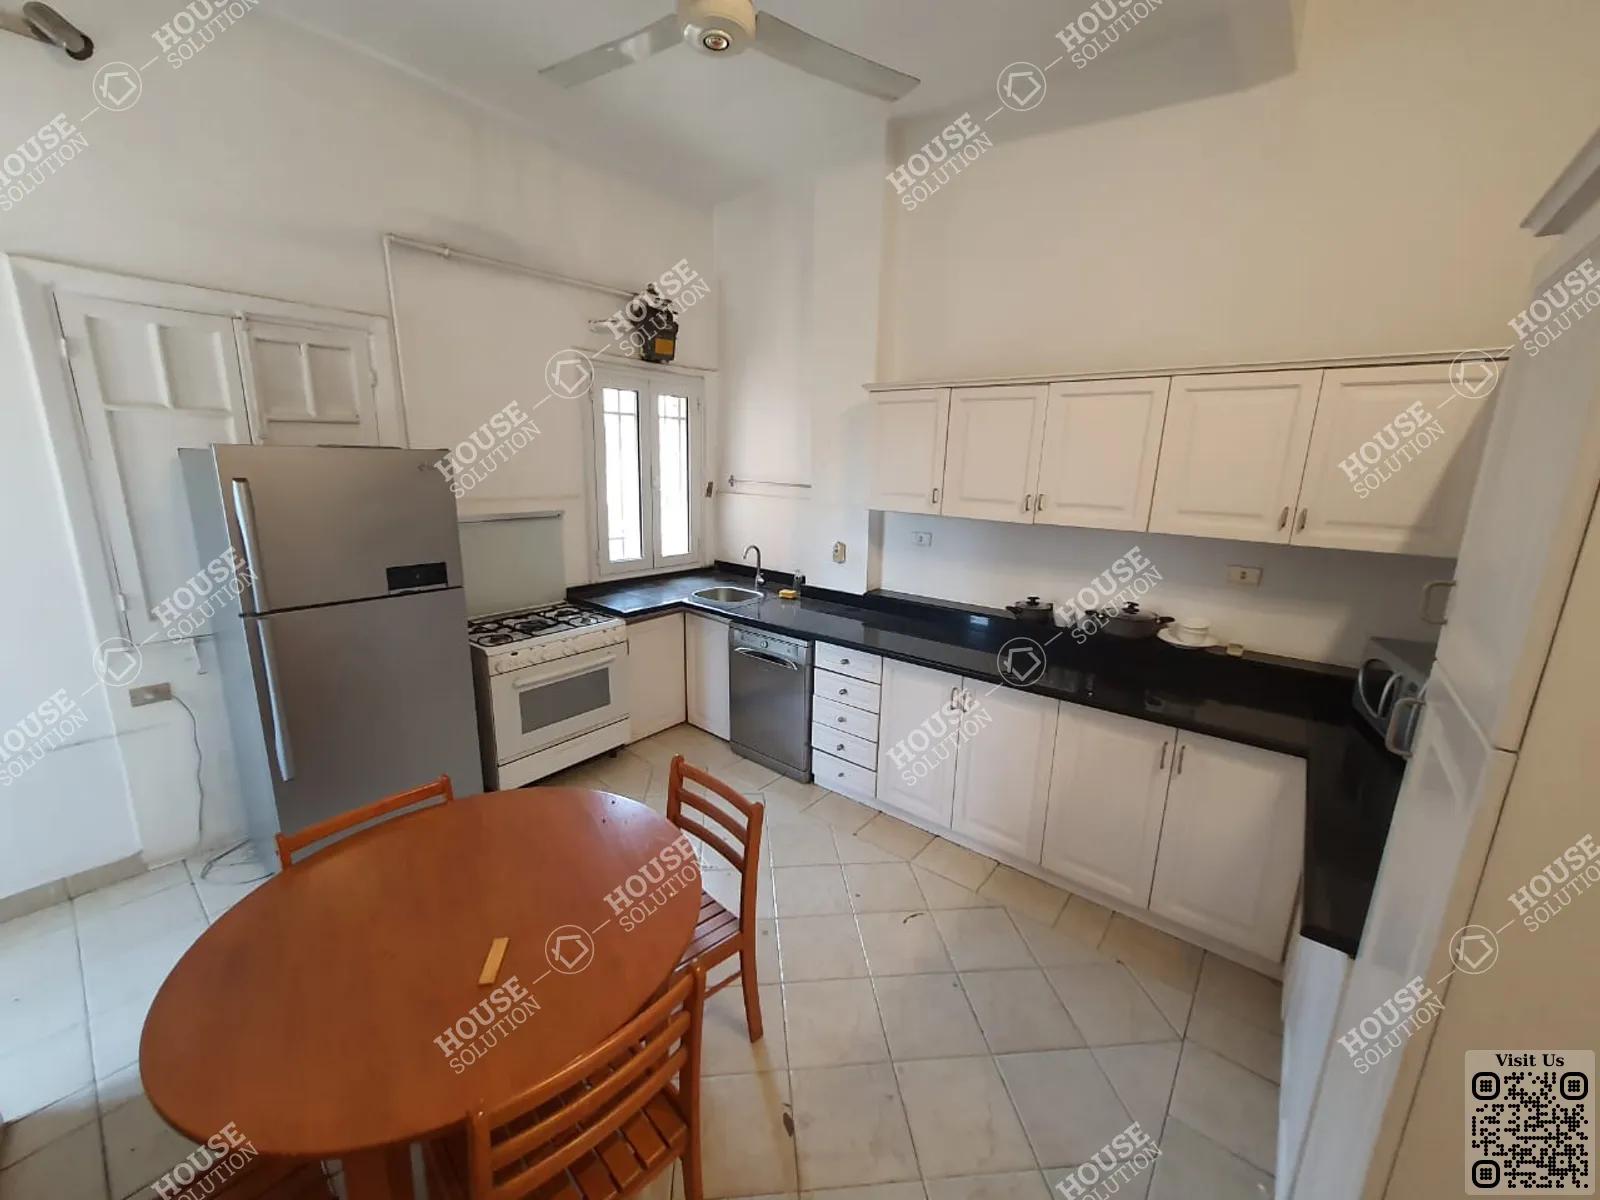 KITCHEN  @ Apartments For Rent In Maadi Old Maadi Area: 230 m² consists of 3 Bedrooms 2 Bathrooms Modern furnished 5 stars #5463-2